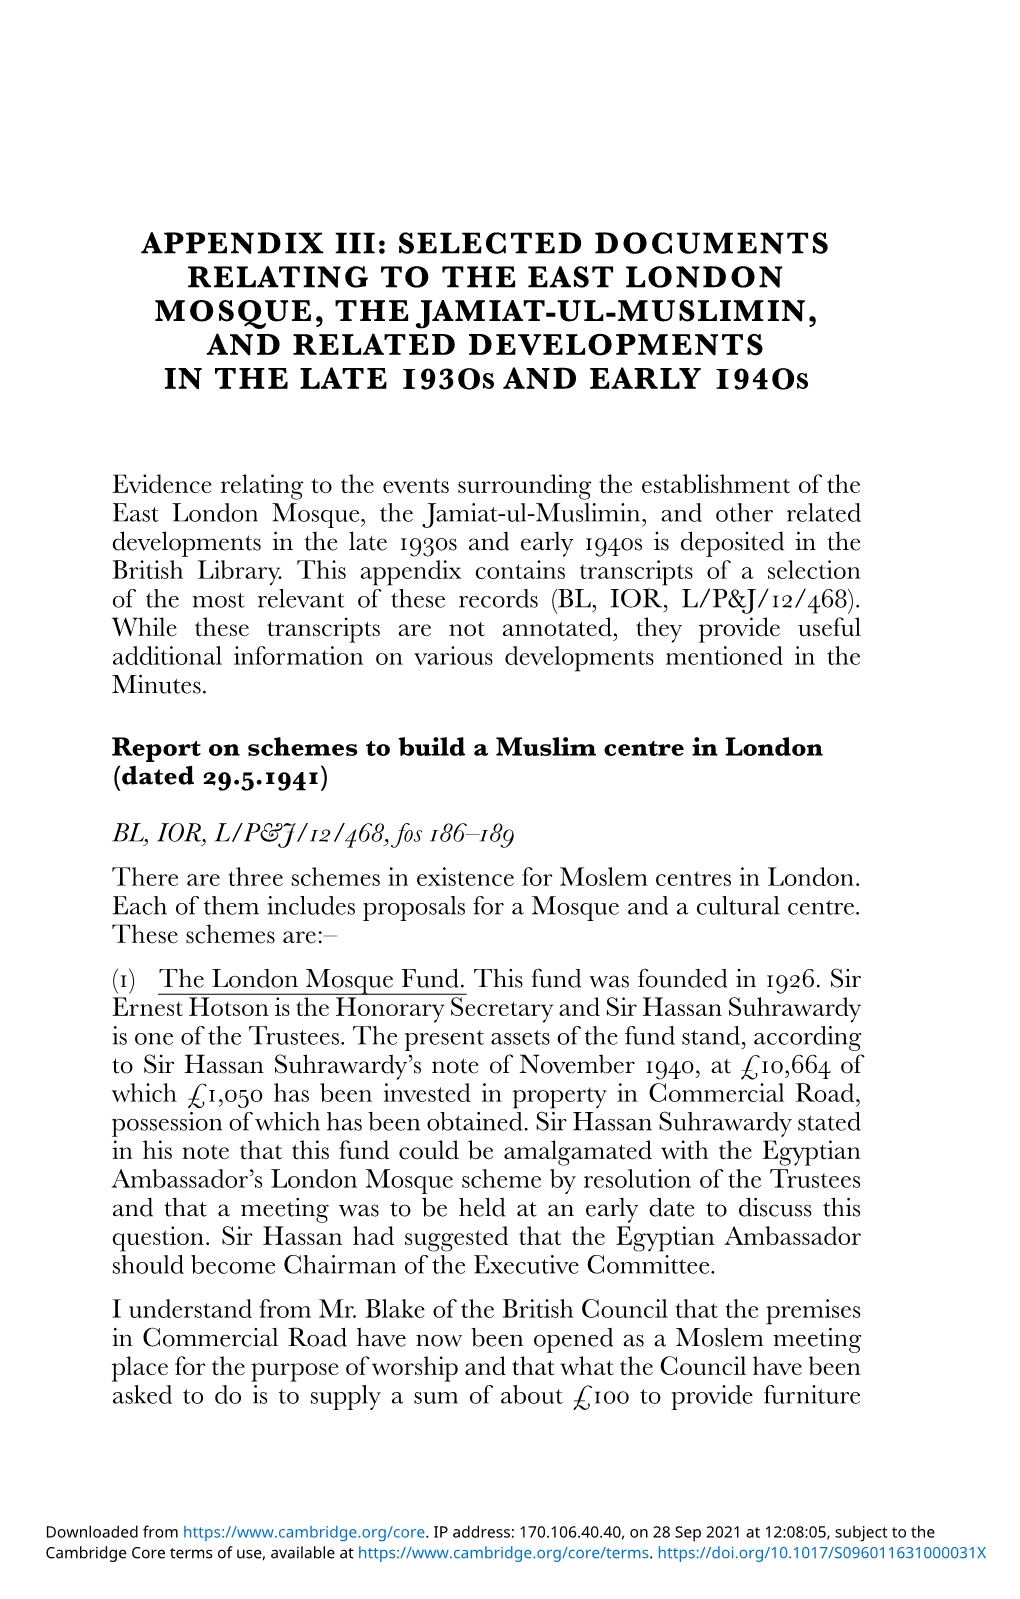 Appendix Iii: Selected Documents Relating to the East London Mosque, the Jamiat-Ul-Muslimin, and Related Developments 93 94 in the Late 1 0S and Early 1 0S